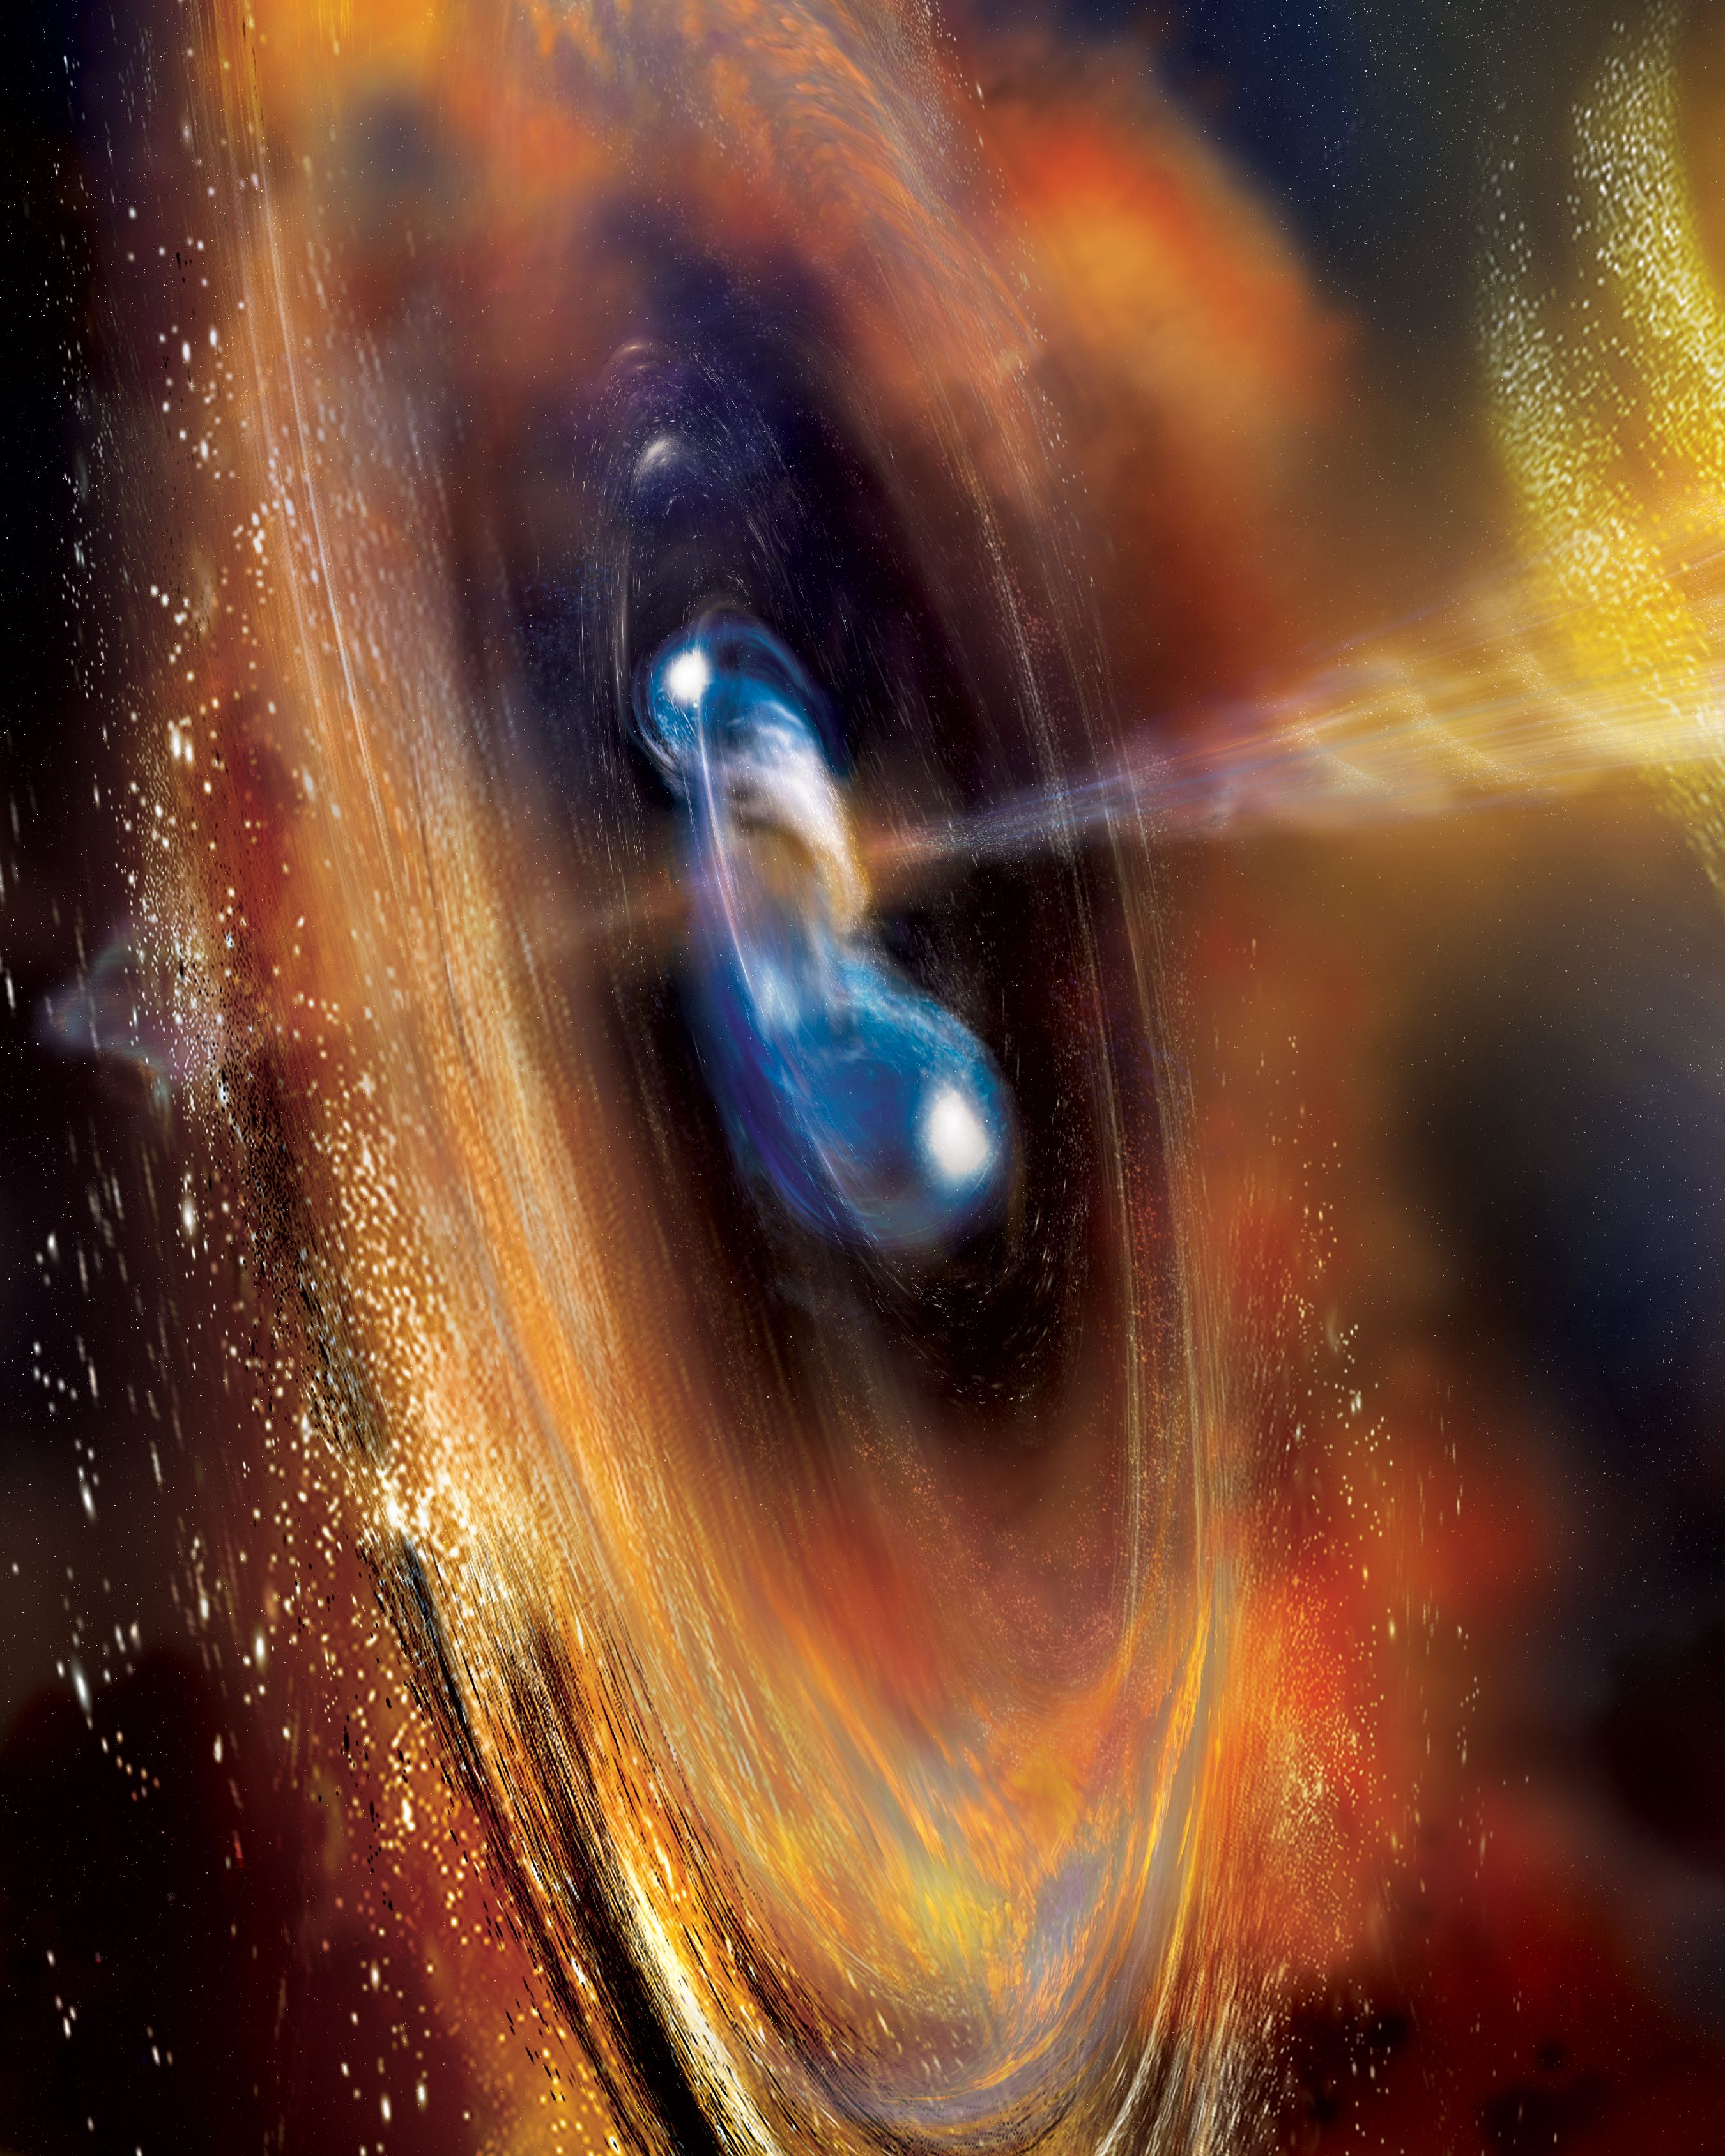 NASA's Fermi Telescope Finds Giant Structure in our Galaxy - NASA